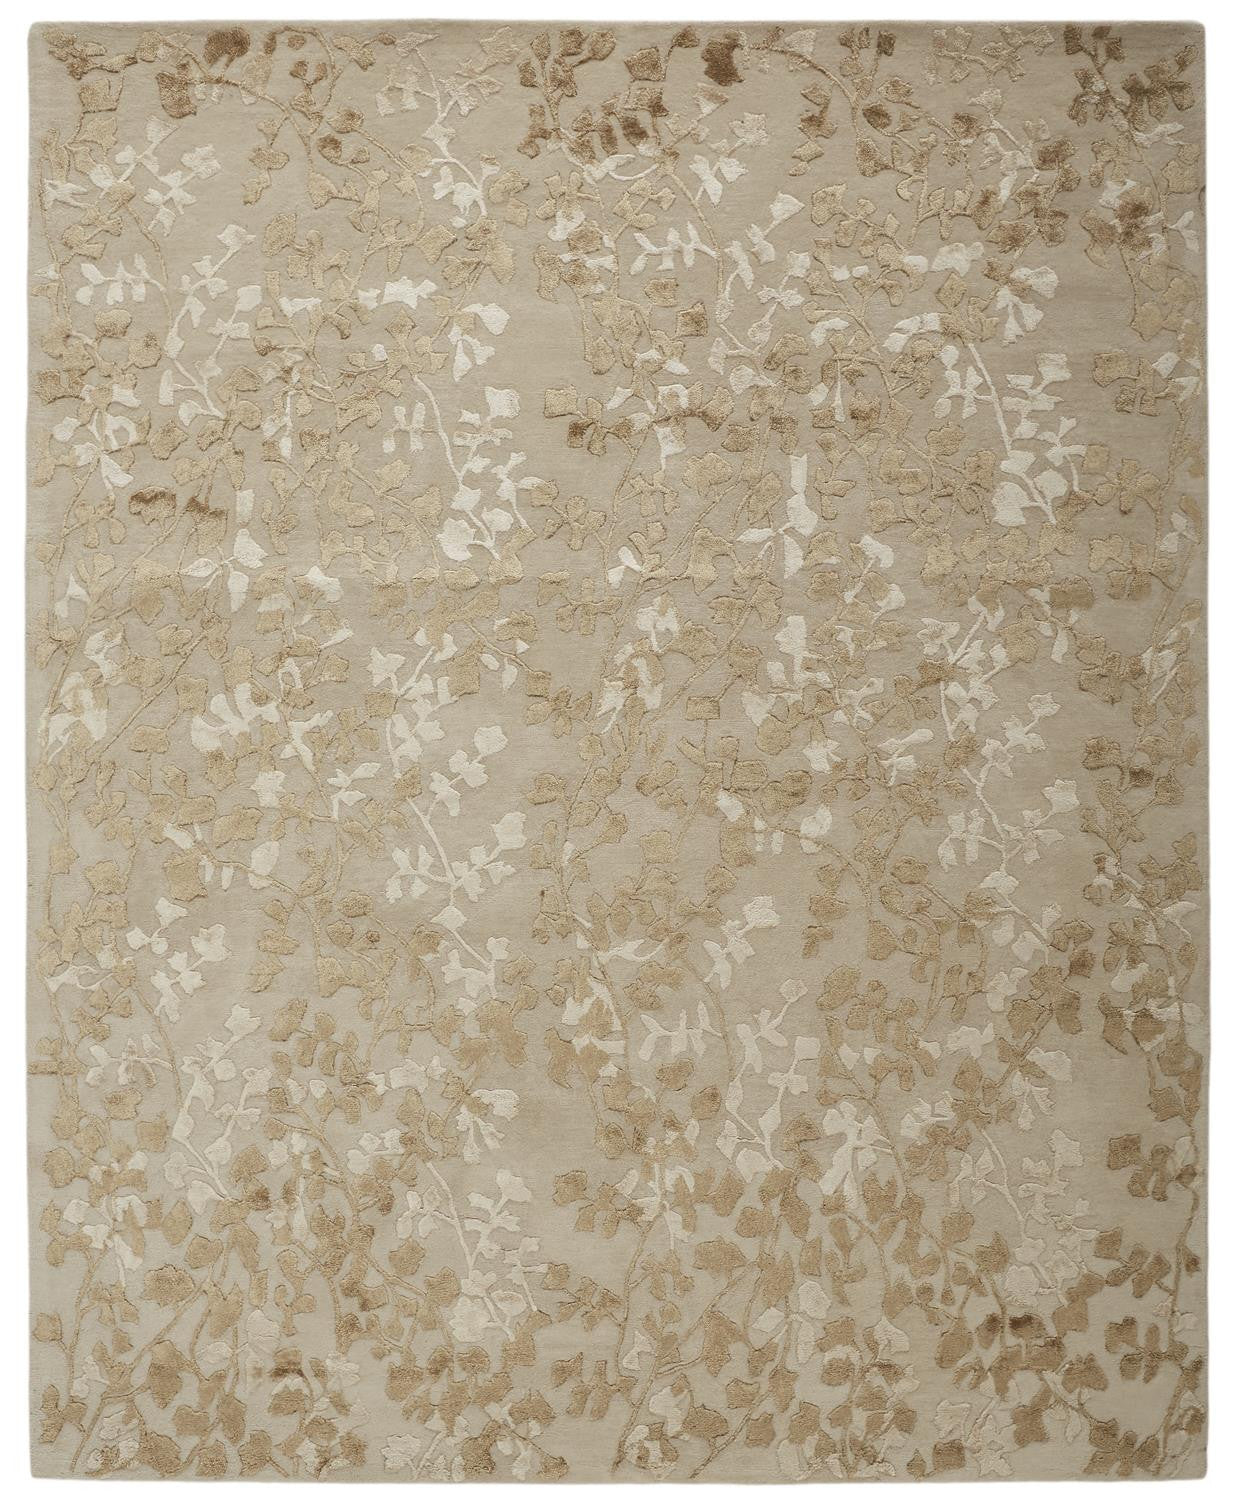 9' X 12' Ivory Tan And Gold Wool Floral Tufted Handmade Area Rug